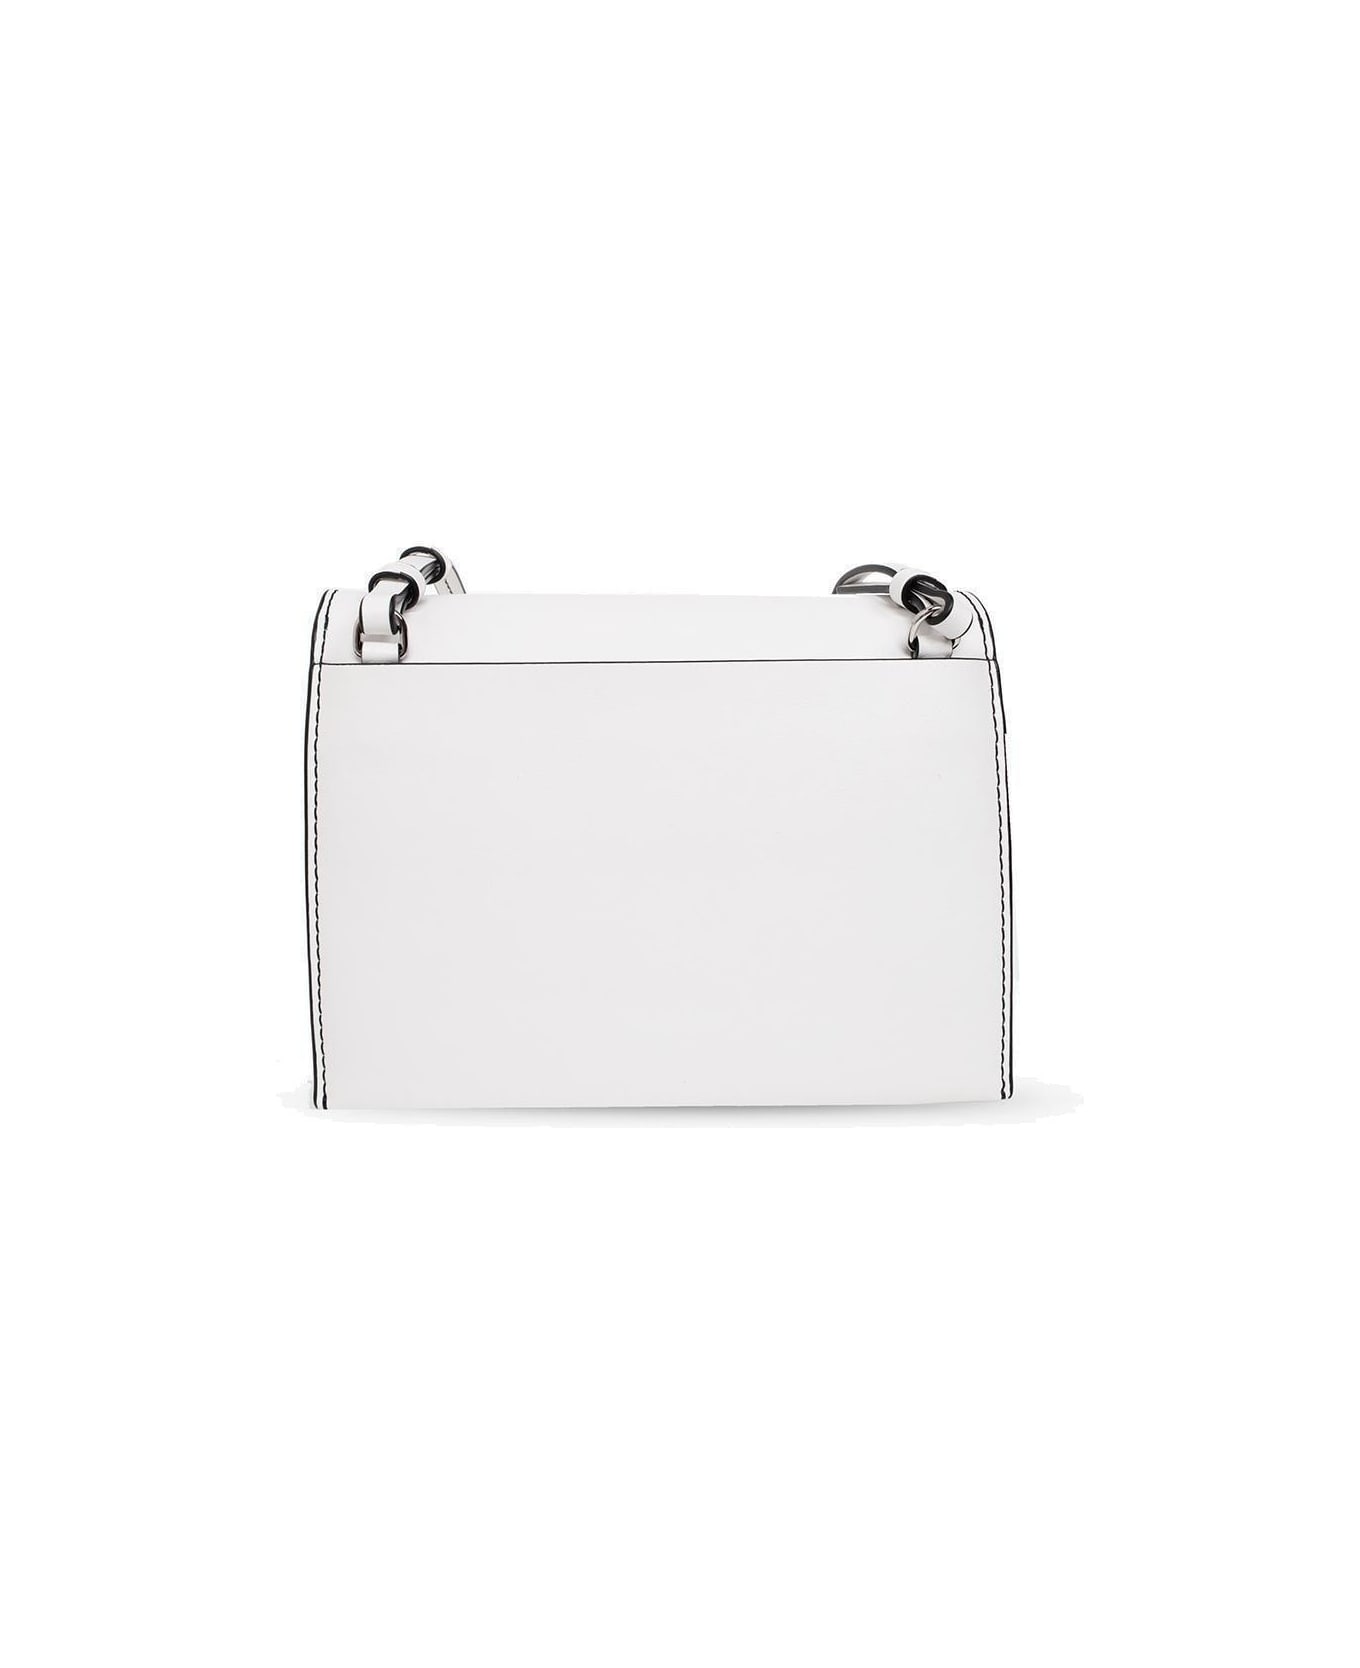 Proenza Schouler White Label Accordition Flap Shoulder Bag - White ショルダーバッグ